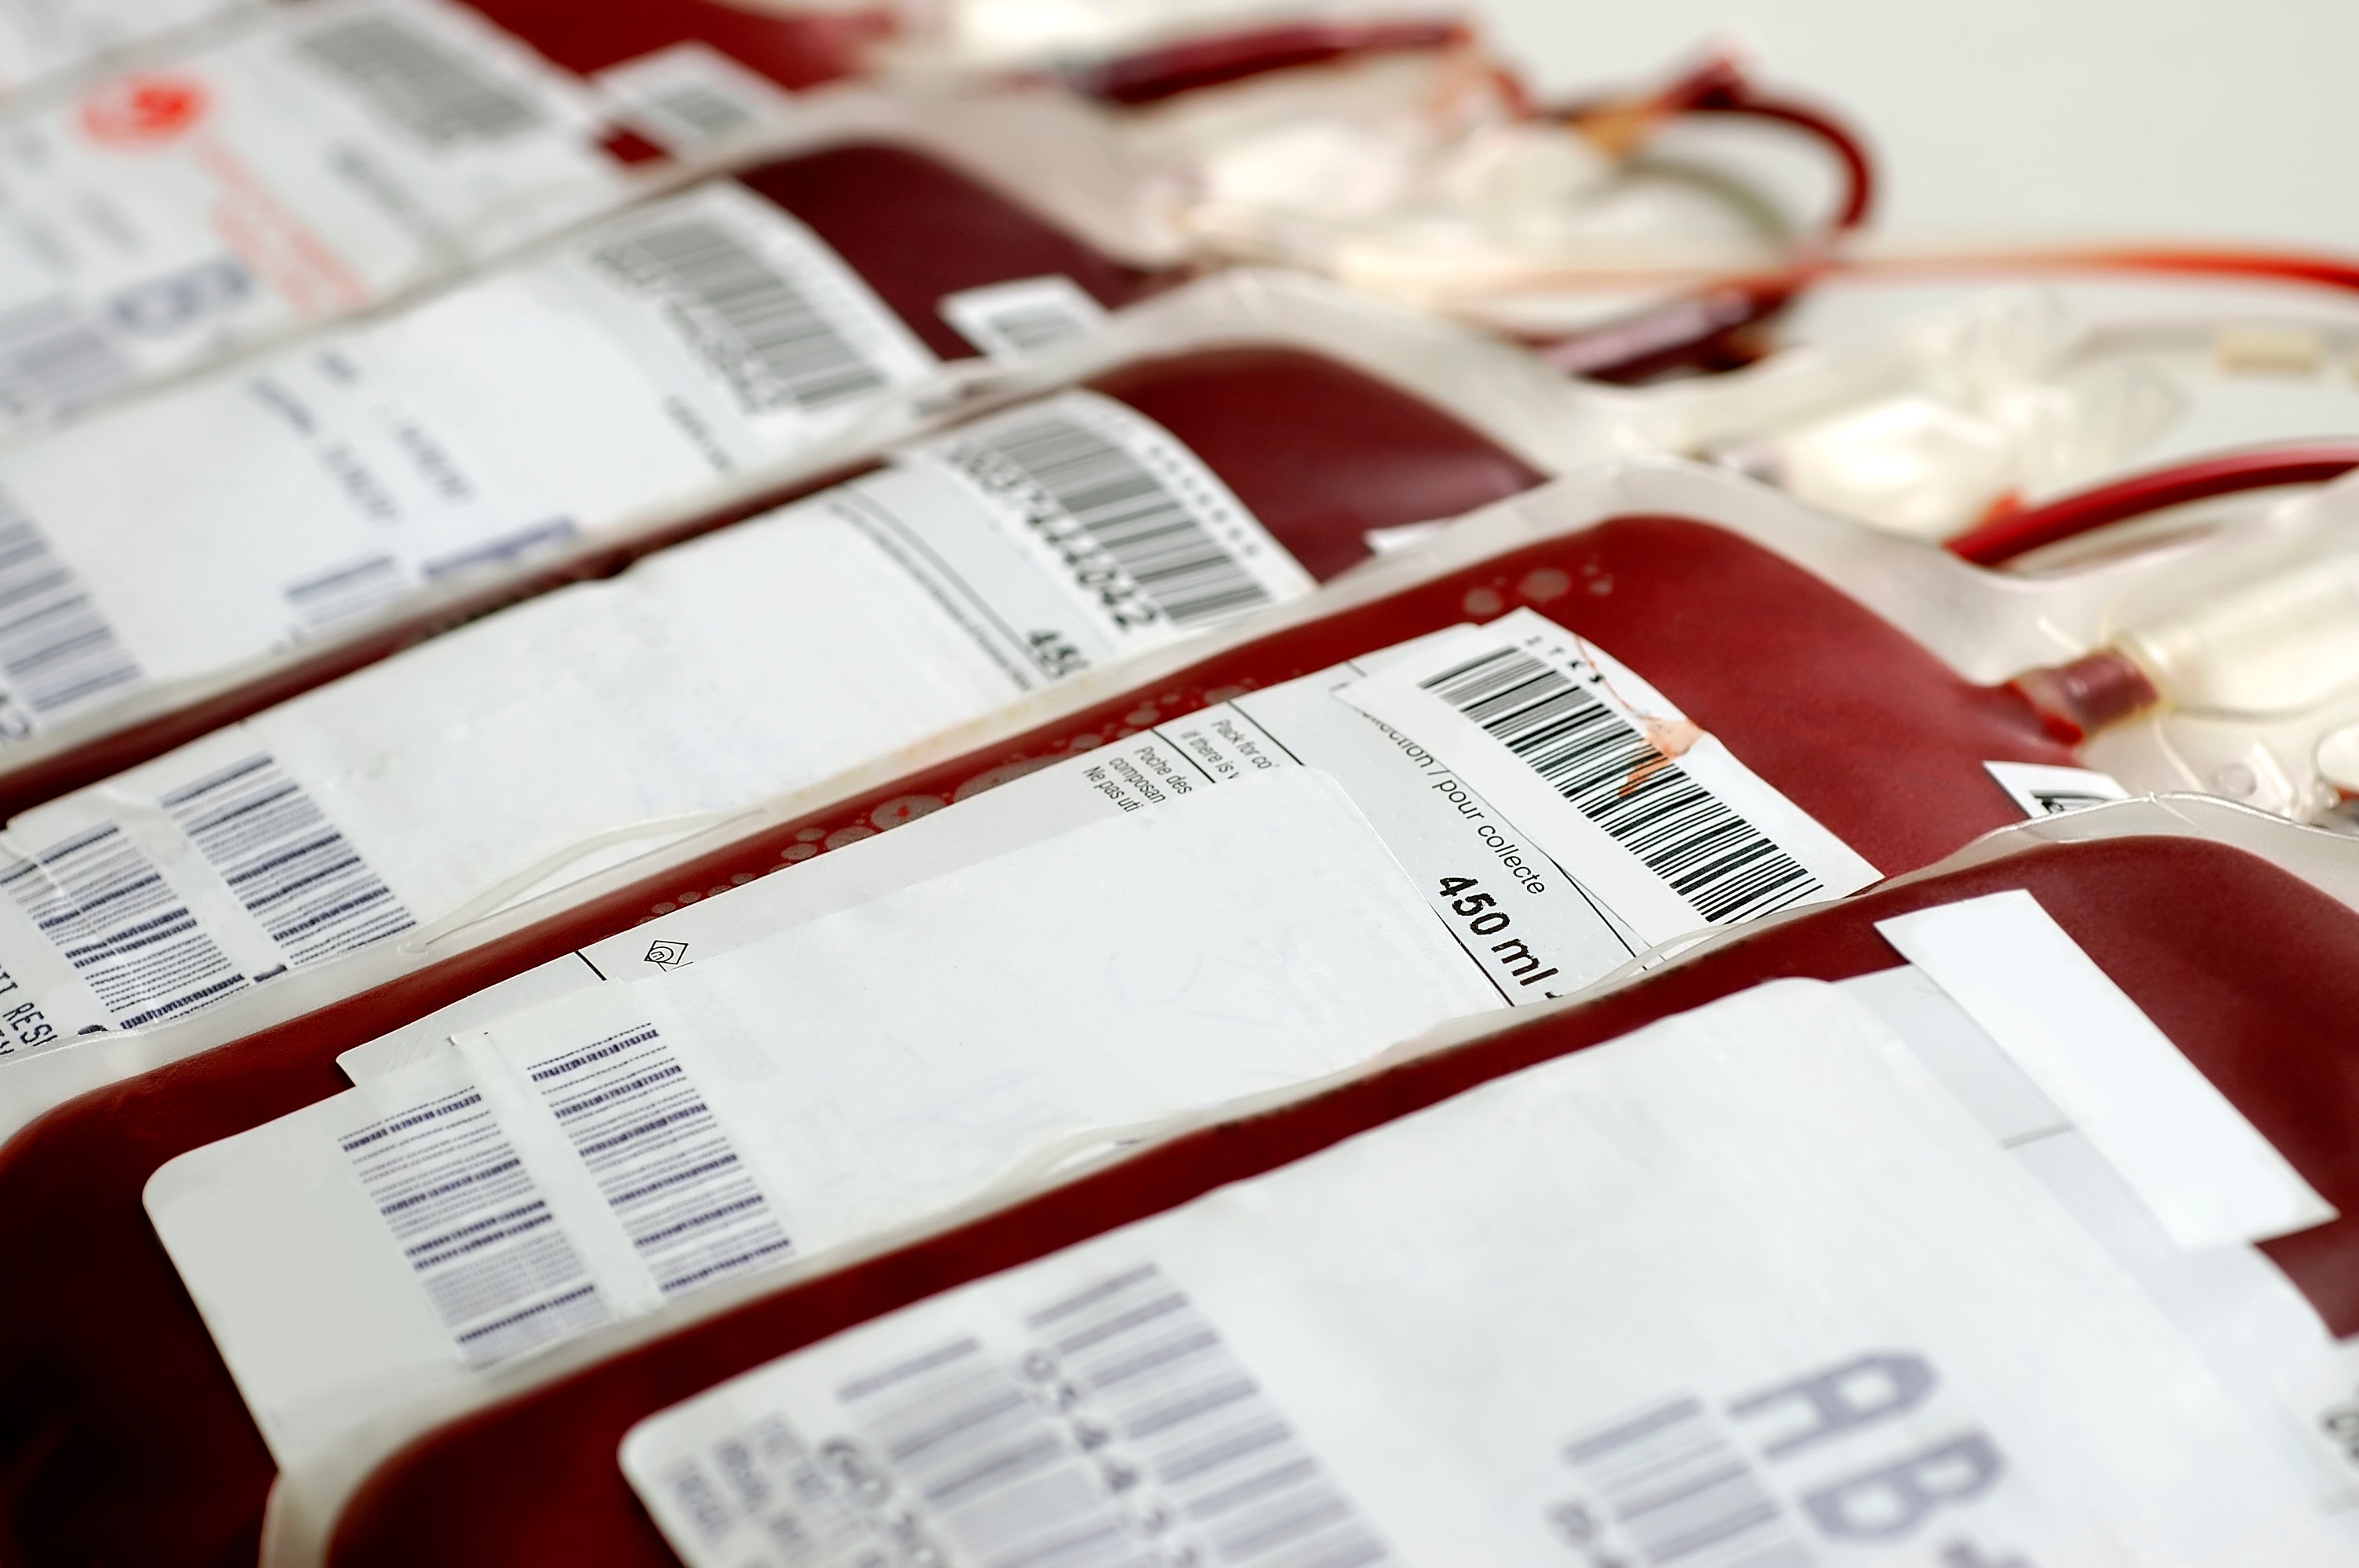 At least 3,000 have died and many are living with serious disabilities having been given tainted blood products